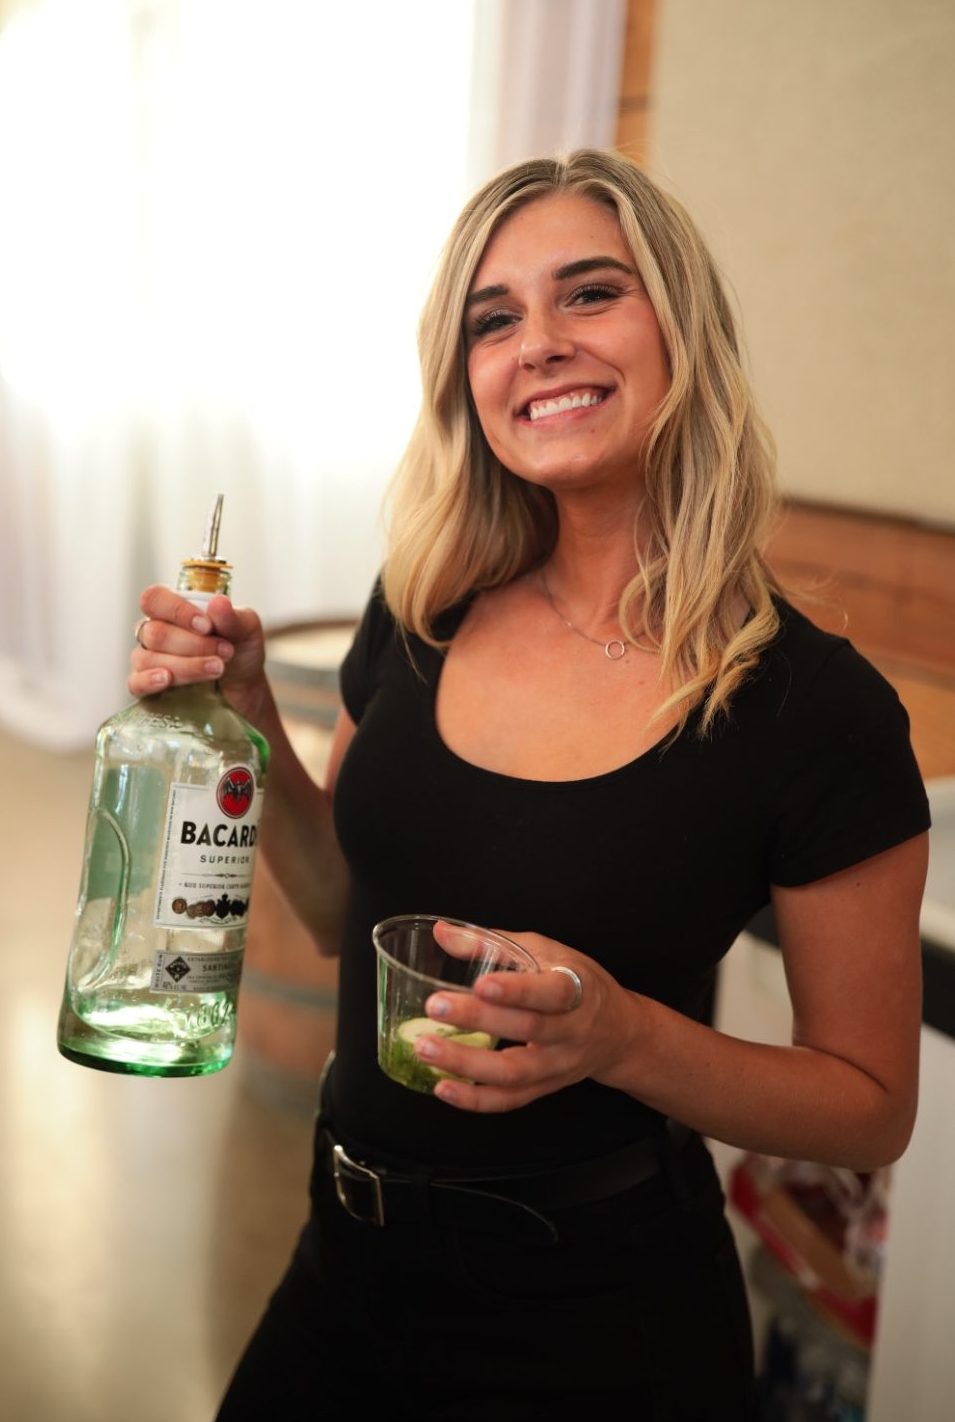 Our bartender Bree holding a bottle of Bacardi Superior rum getting ready to pour a cocktail at The Stables